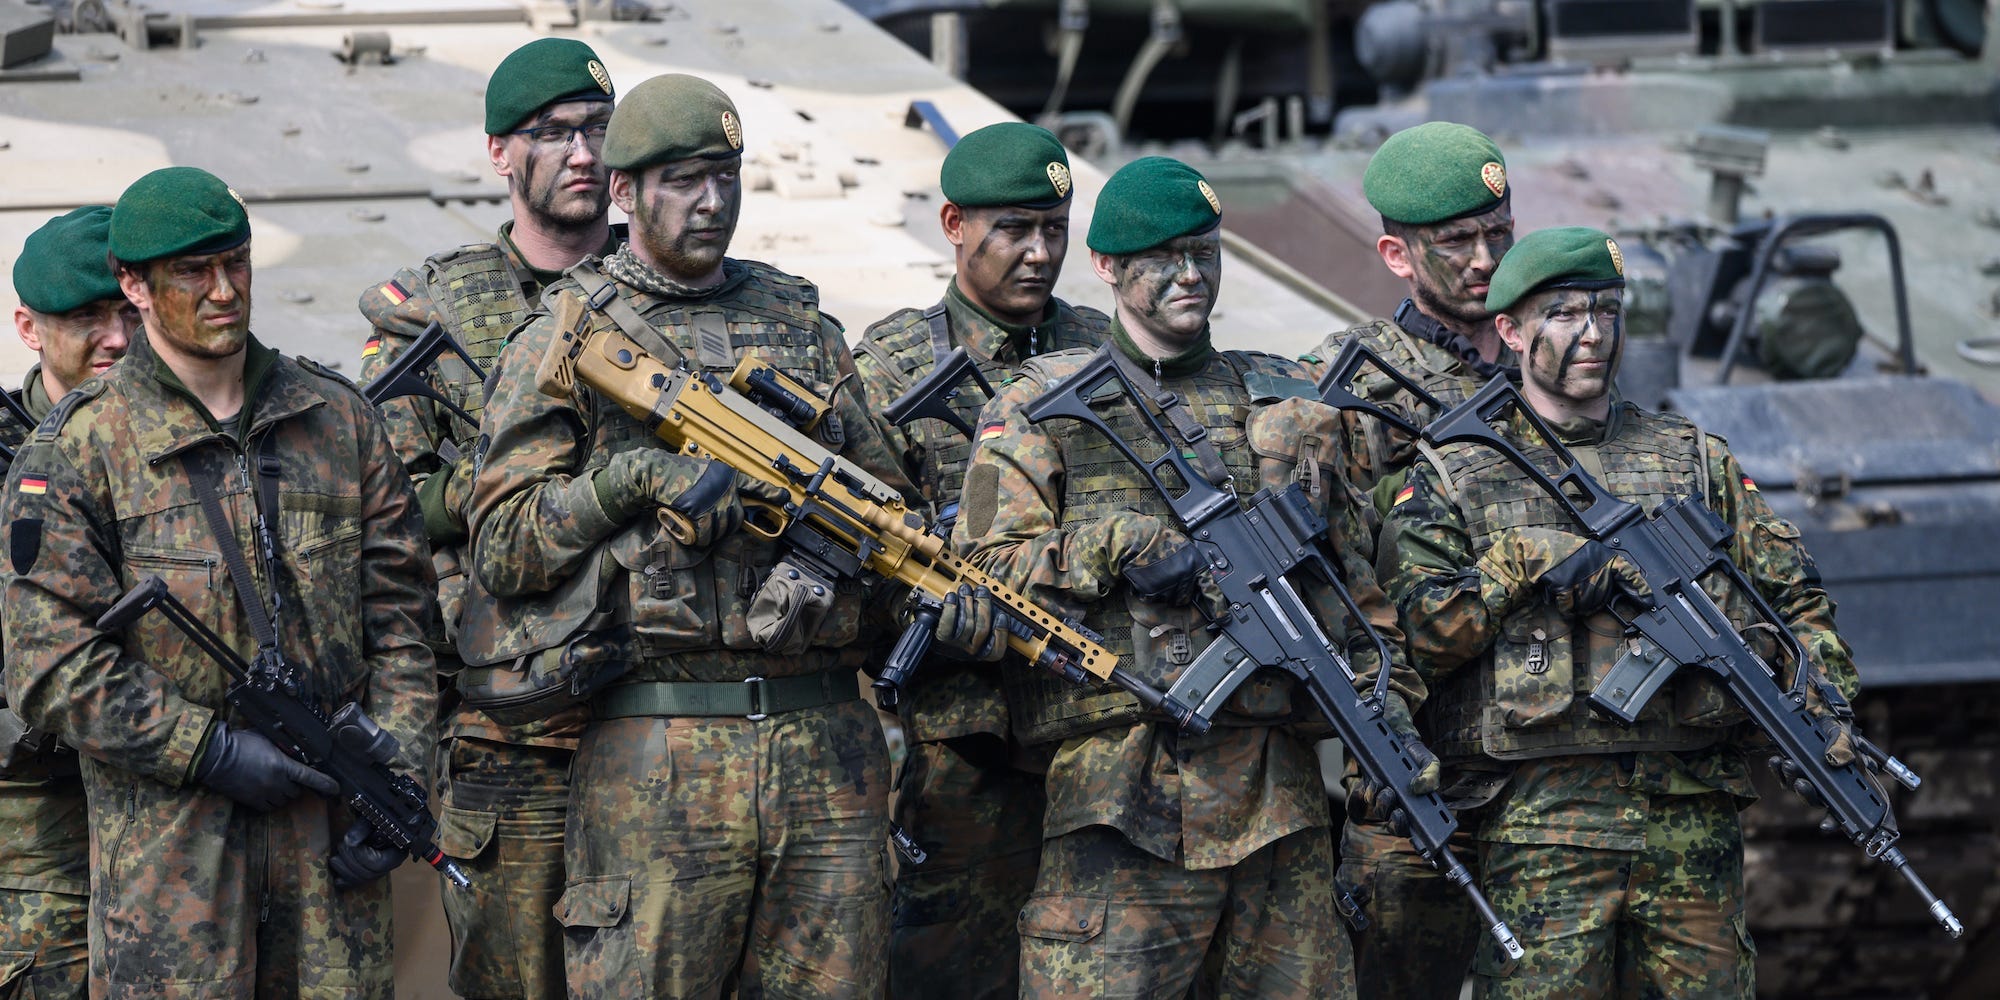 NATO Very High Readiness Joint Task Force soldiers